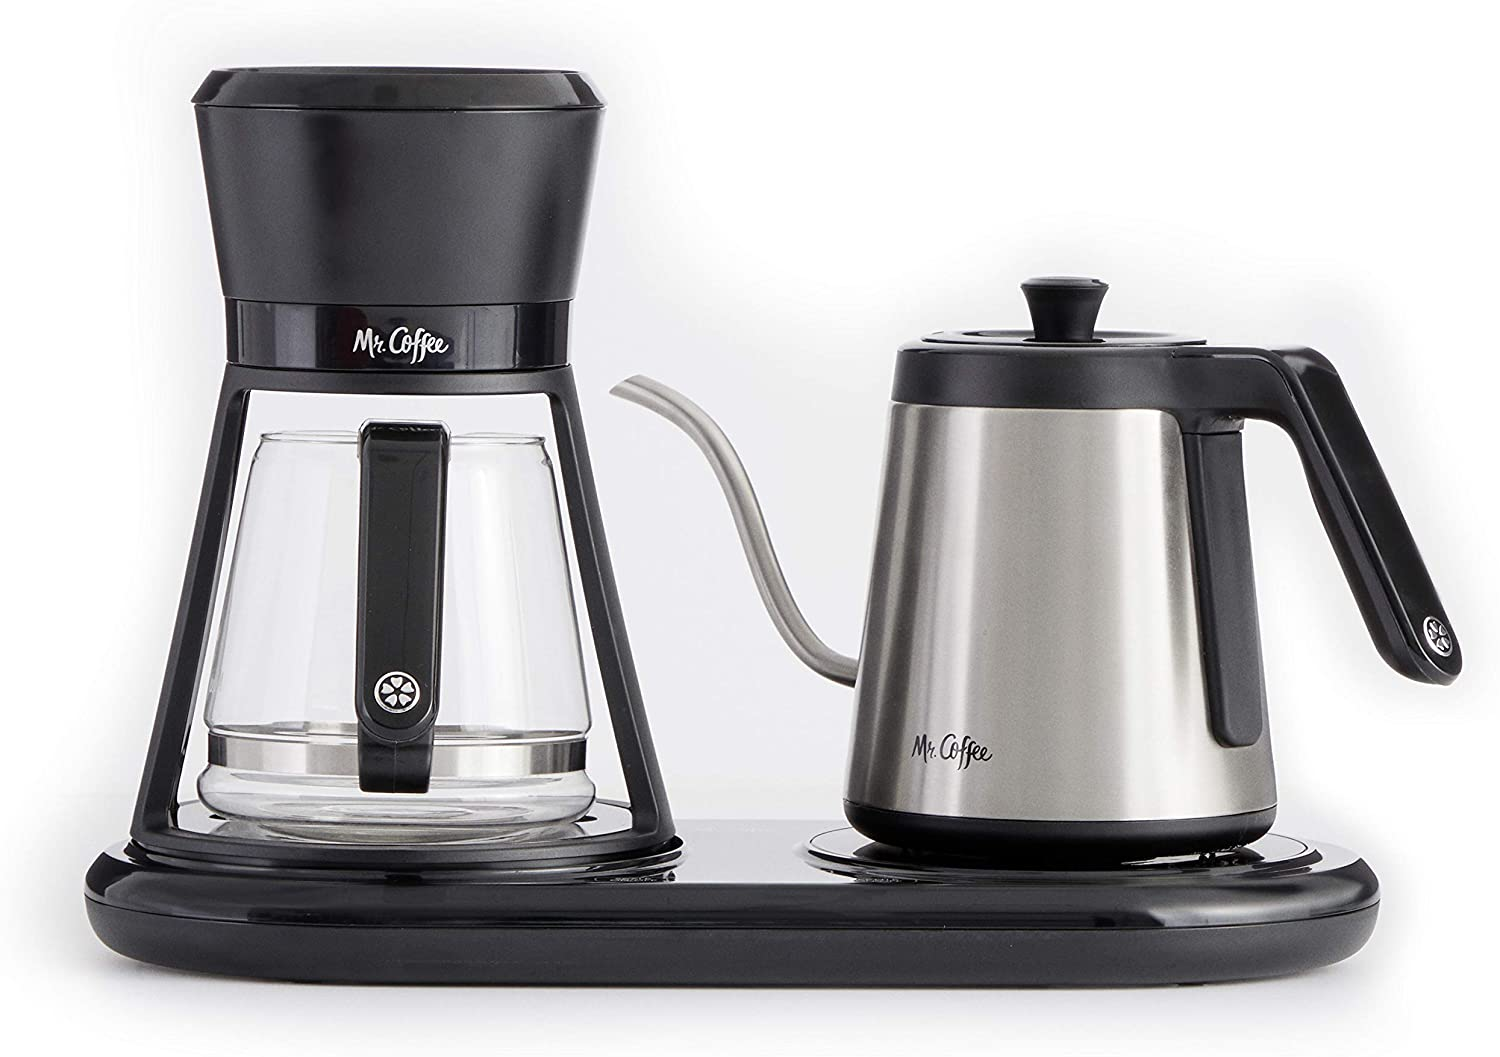 Amazon.com: Mr. Coffee BVMC-PO19B All-in-One Pour Over Coffee Maker, 6 Cups, Black: Kitchen & Dining $71.70